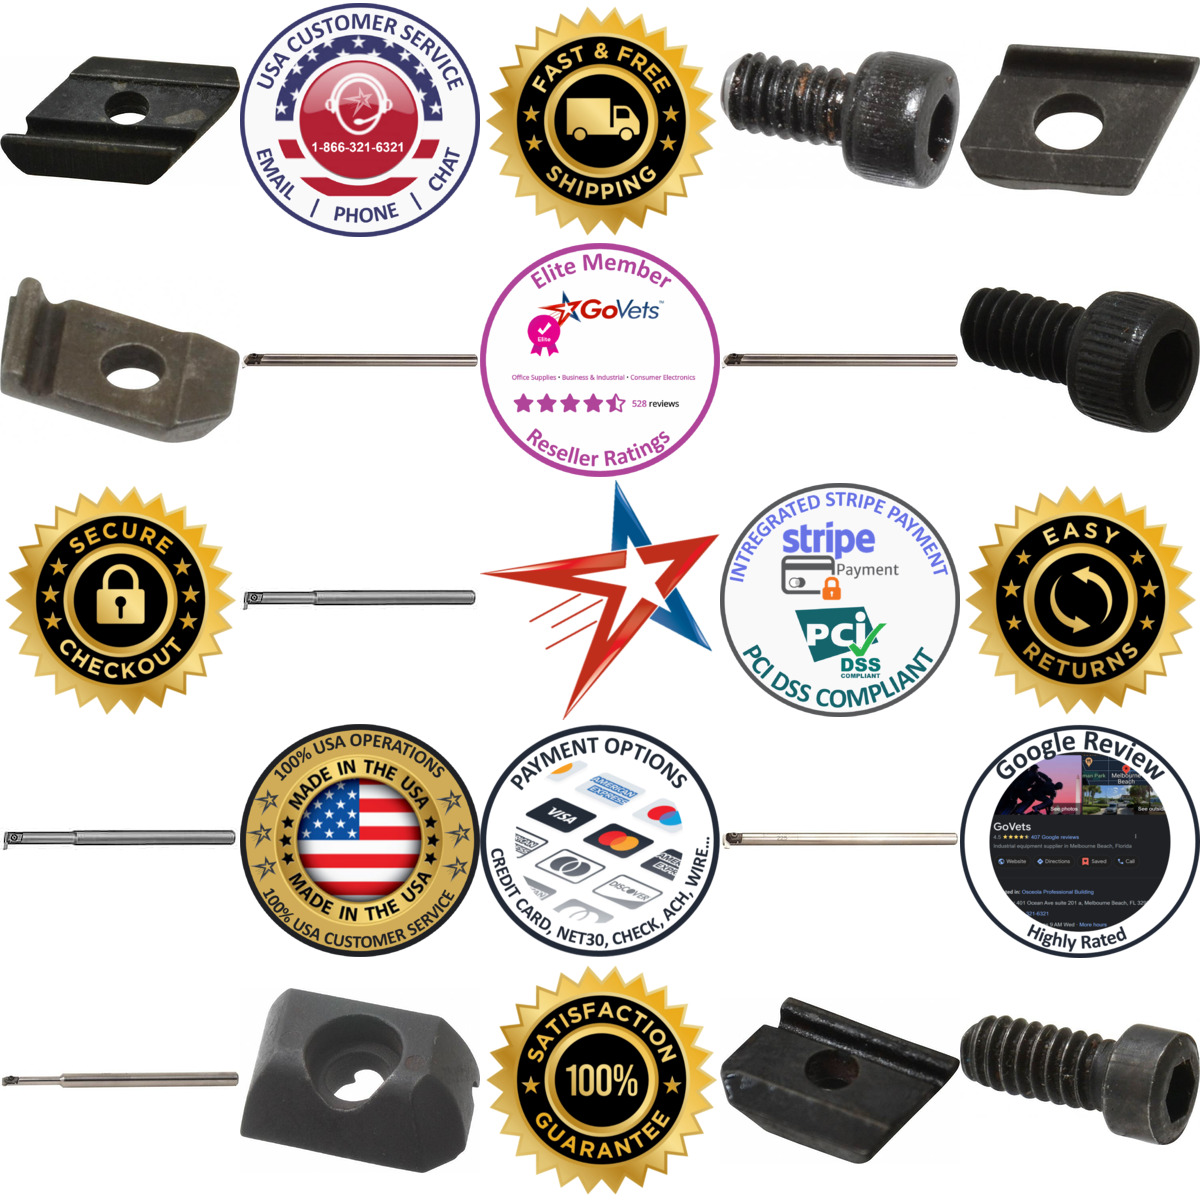 A selection of Tool Bit Holder Clamps and Hardware products on GoVets